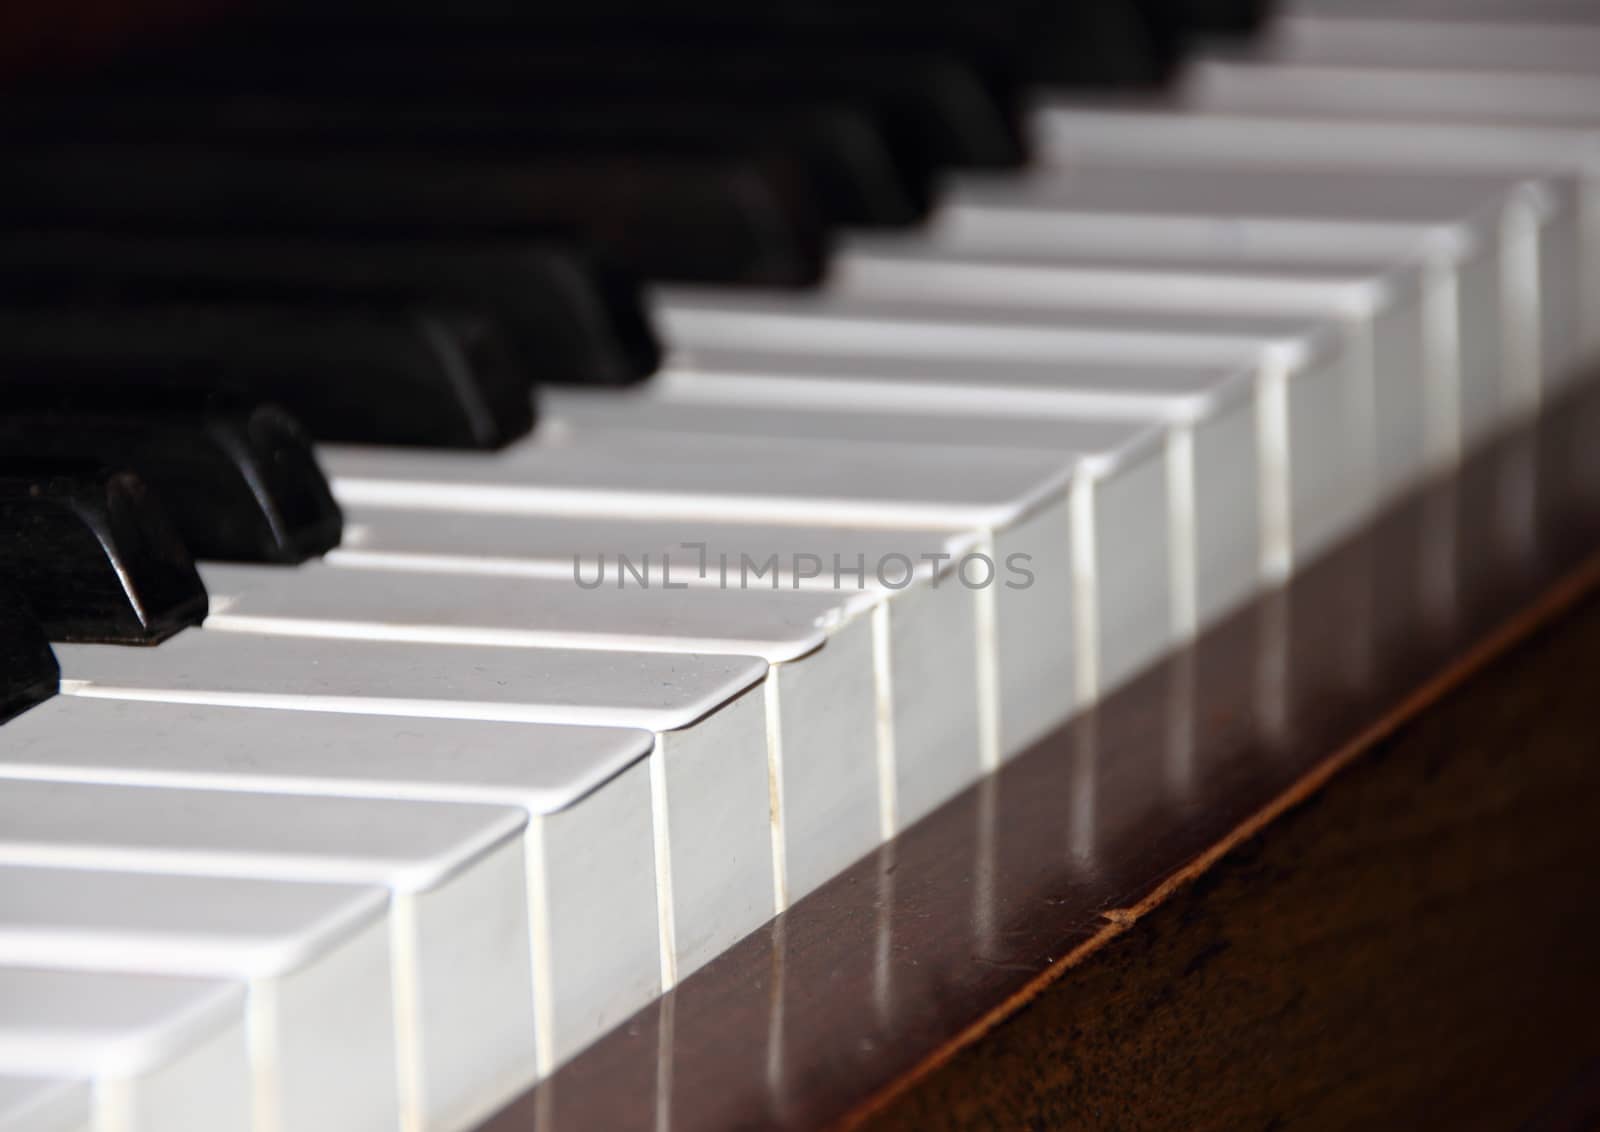 Old piano keys close up with shadow